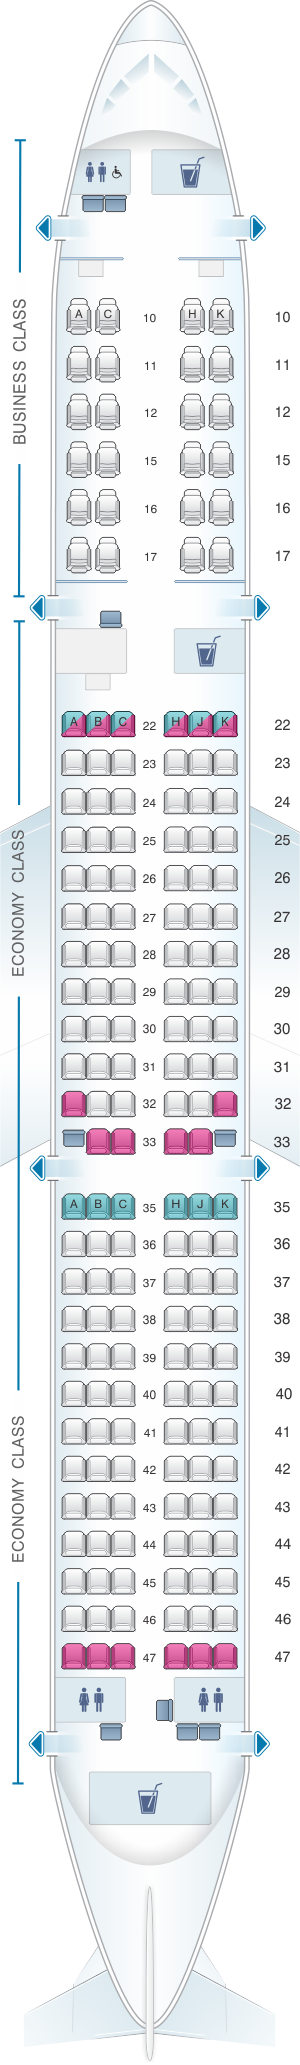 Seat map for Cathay Dragon Airbus A321 200